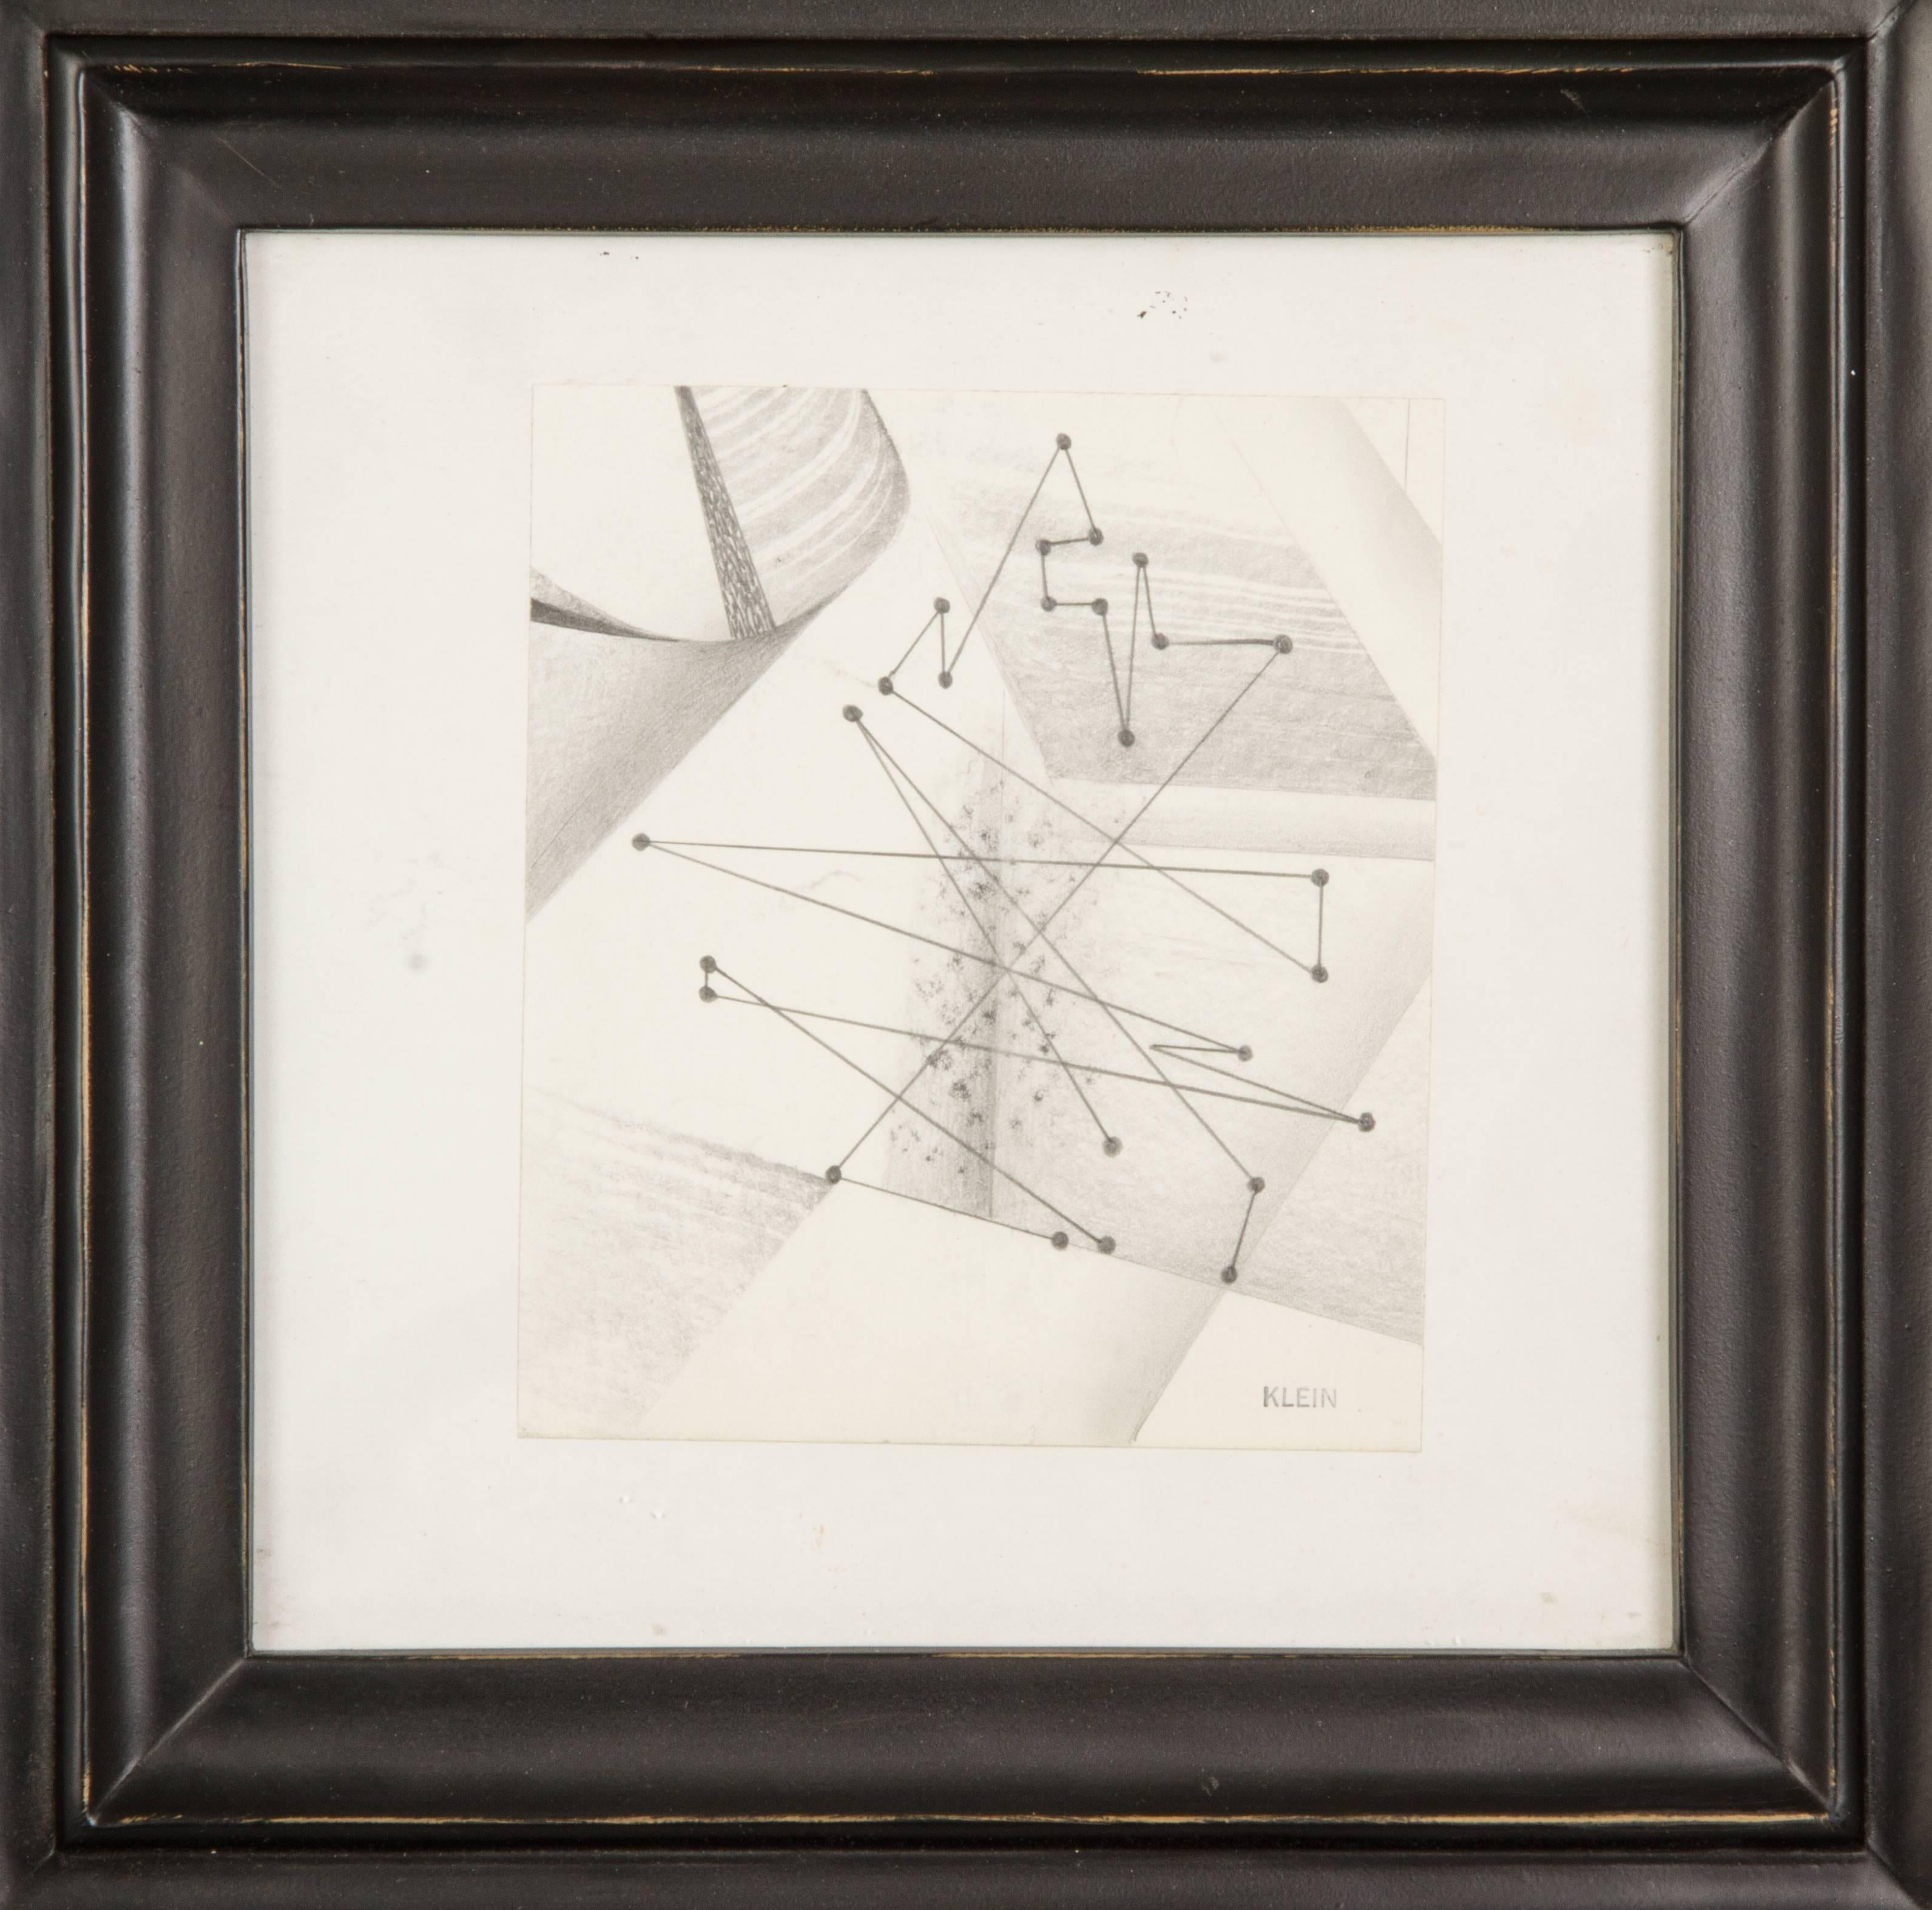 This is a wonderful little abstract drawing complimented by a handsome stepped frame. The drawing itself measures 9.75